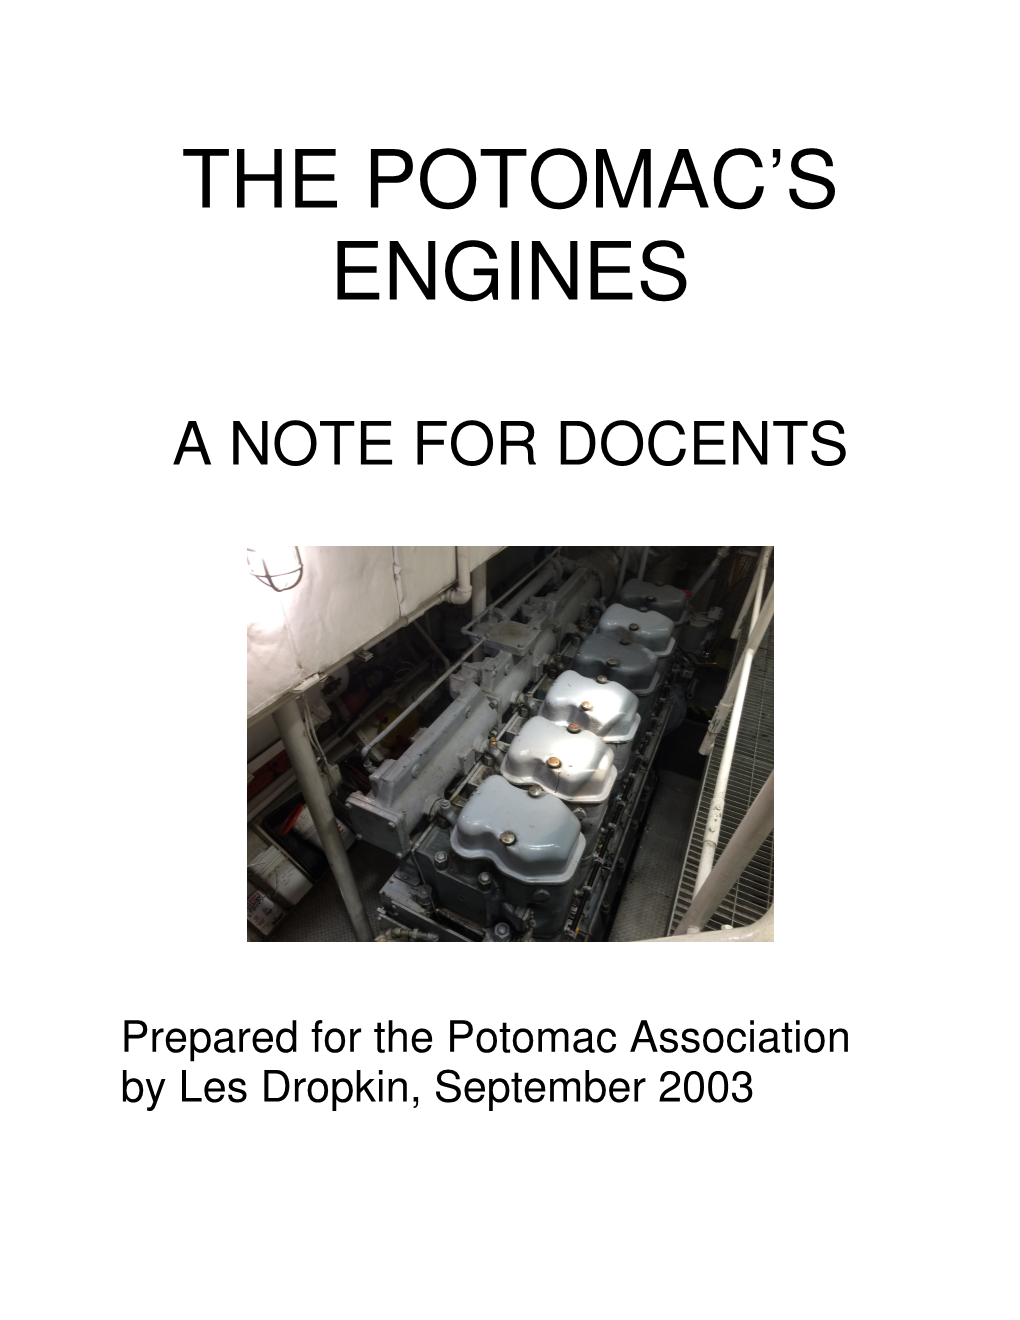 The Potomac's Engines